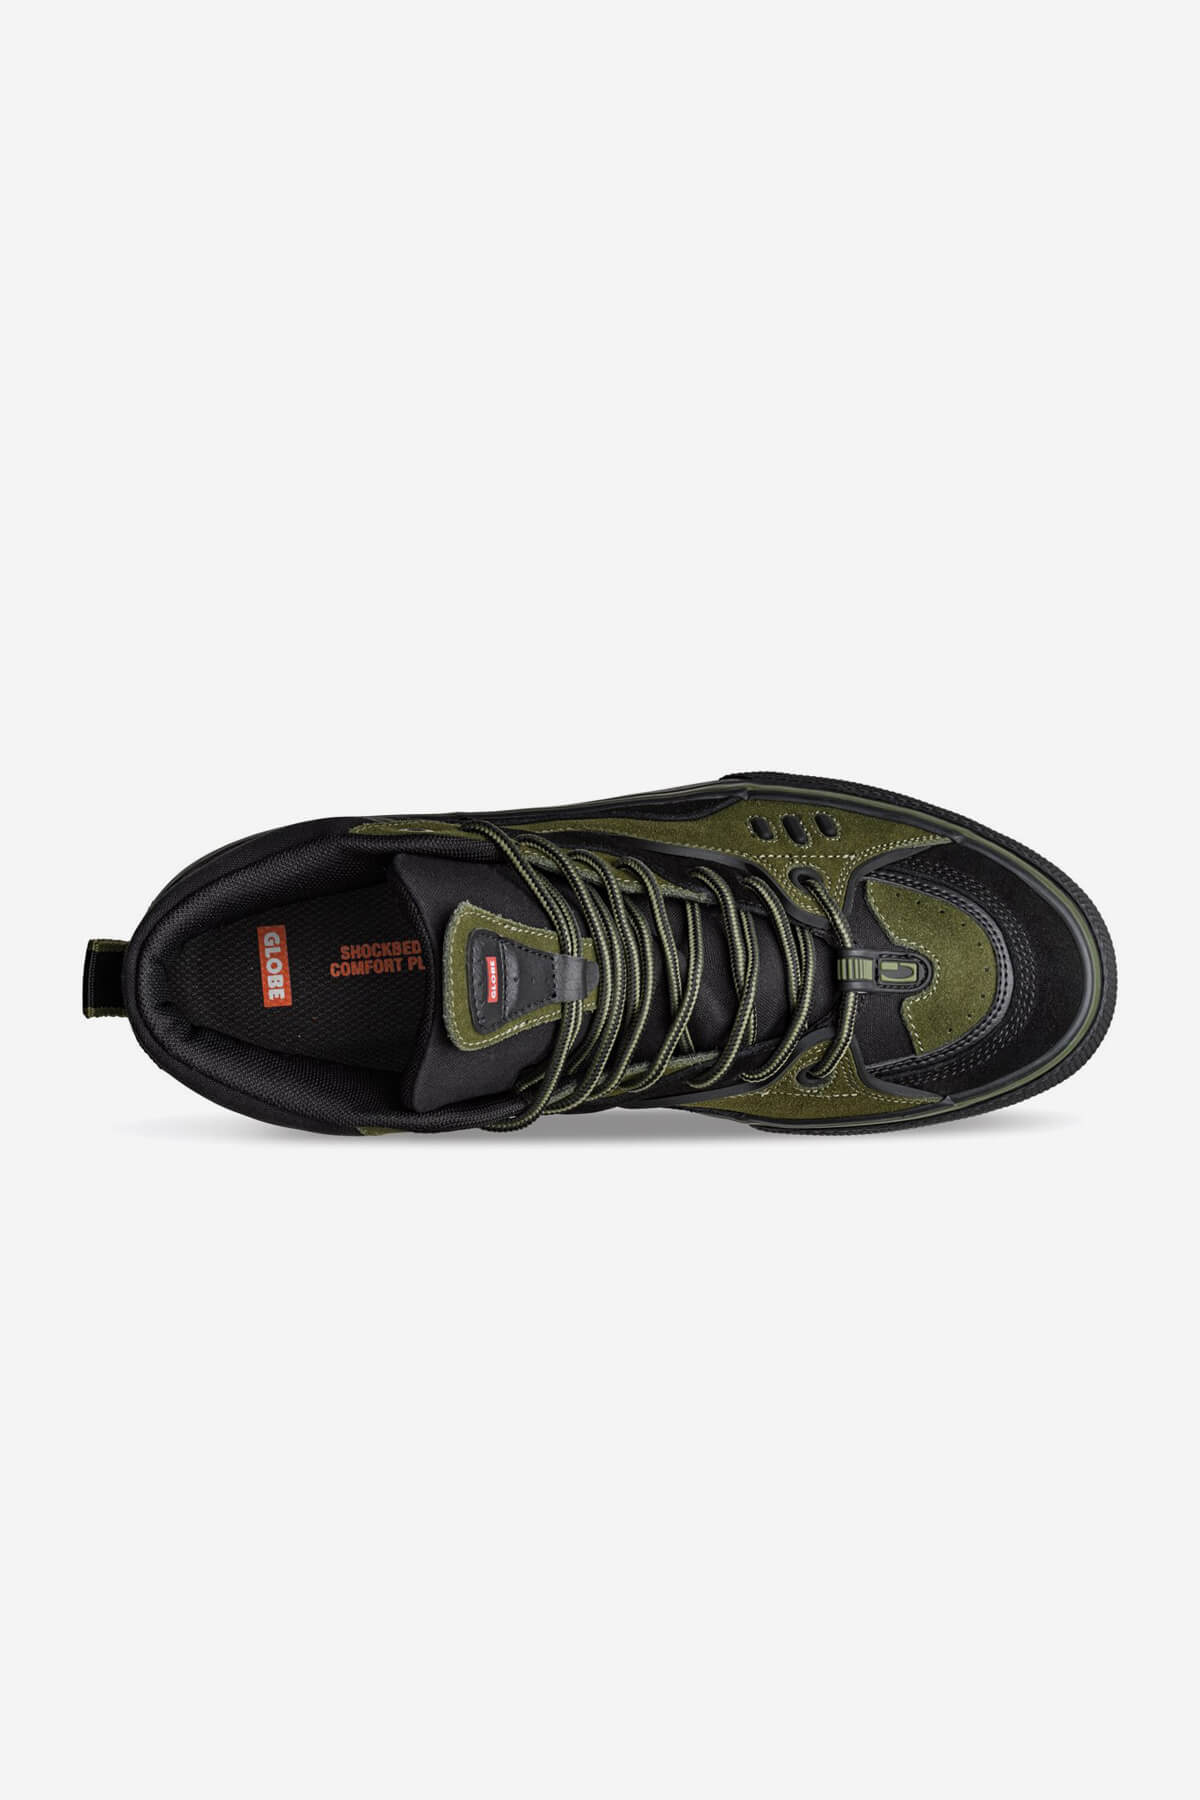 Globe Mid shoes Dimension skateboard  shoes in Black/Moss/Summit